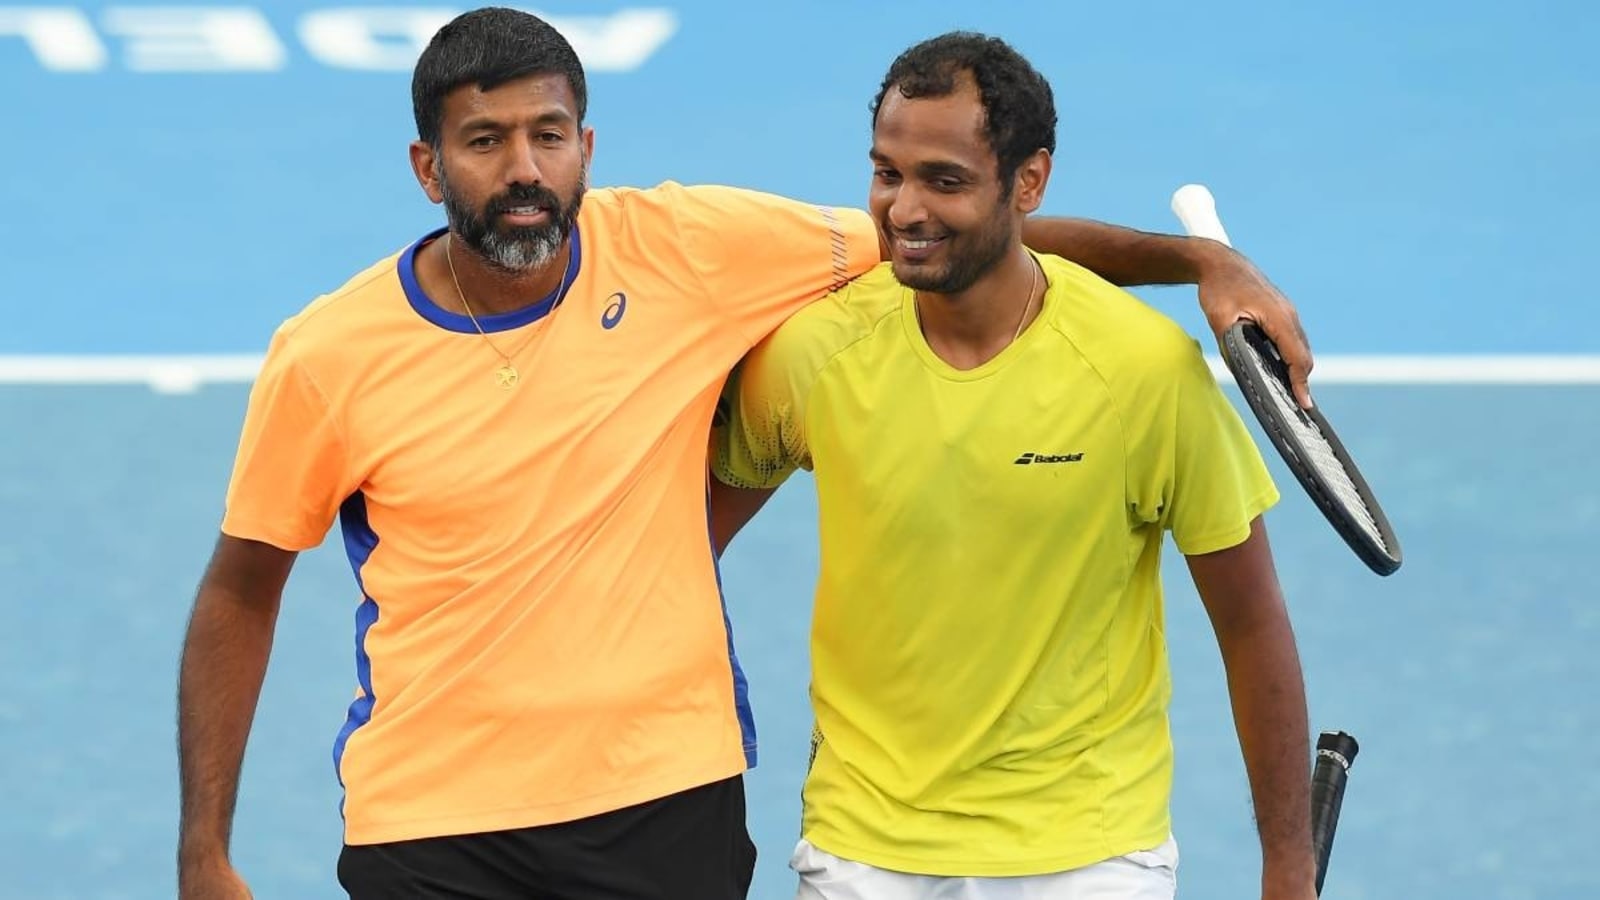 ‘Pairing with Bopanna was destined. The vibe was unbelievable and we played some unreal tennis’: Ramkumar Ramanathan